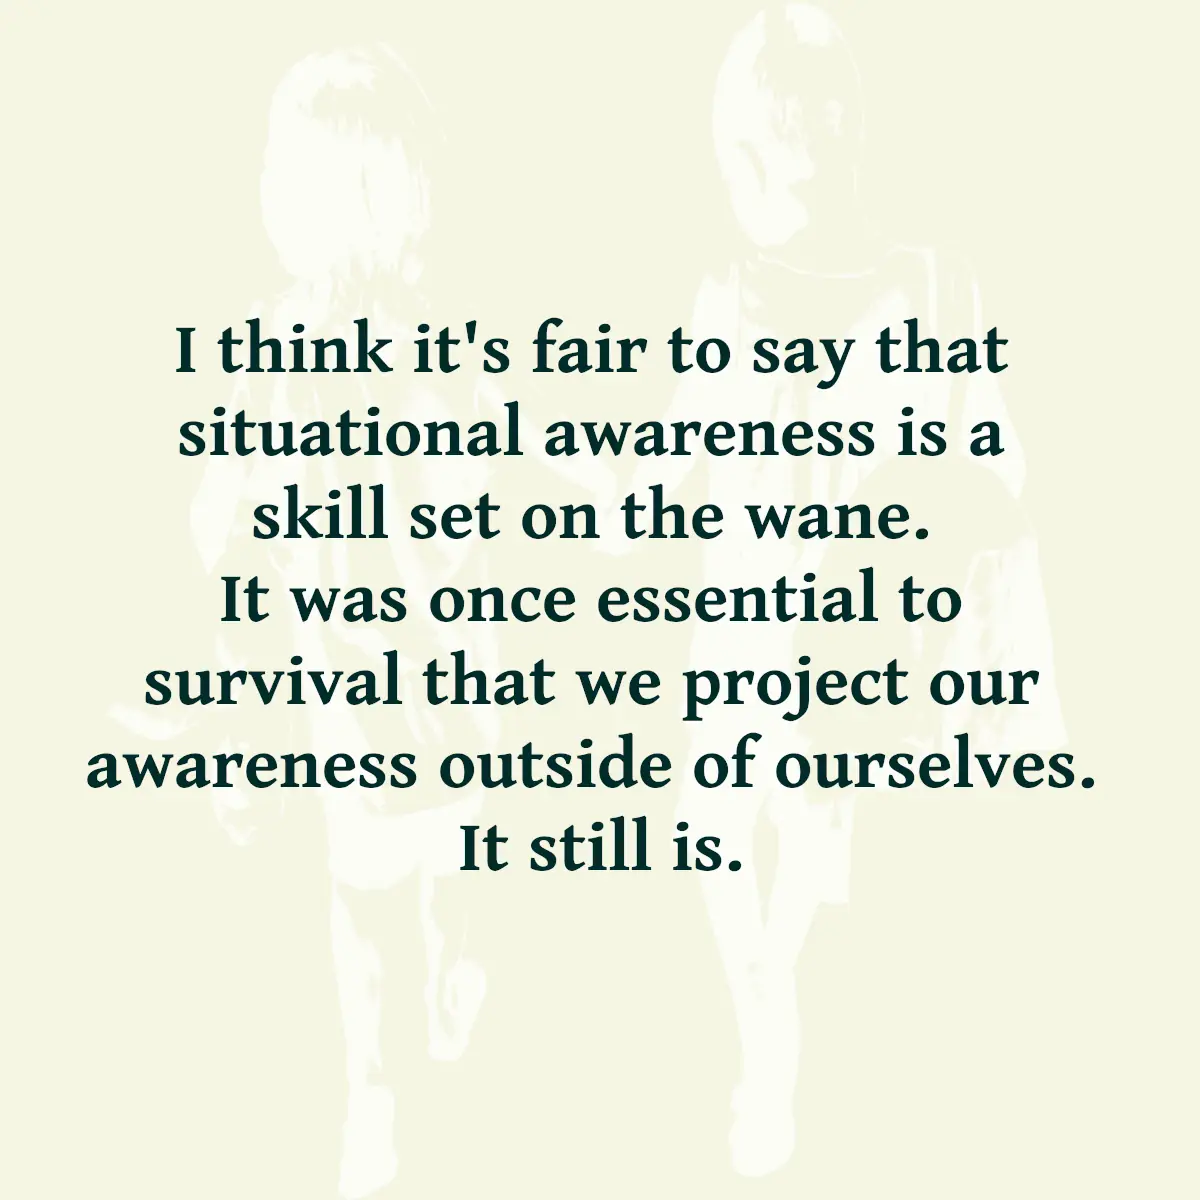 Text reading: I think it's fair to say that situational awareness is a skill set on the wane. It was once essential to survival that we project our awareness outside of ourselves. It still is.